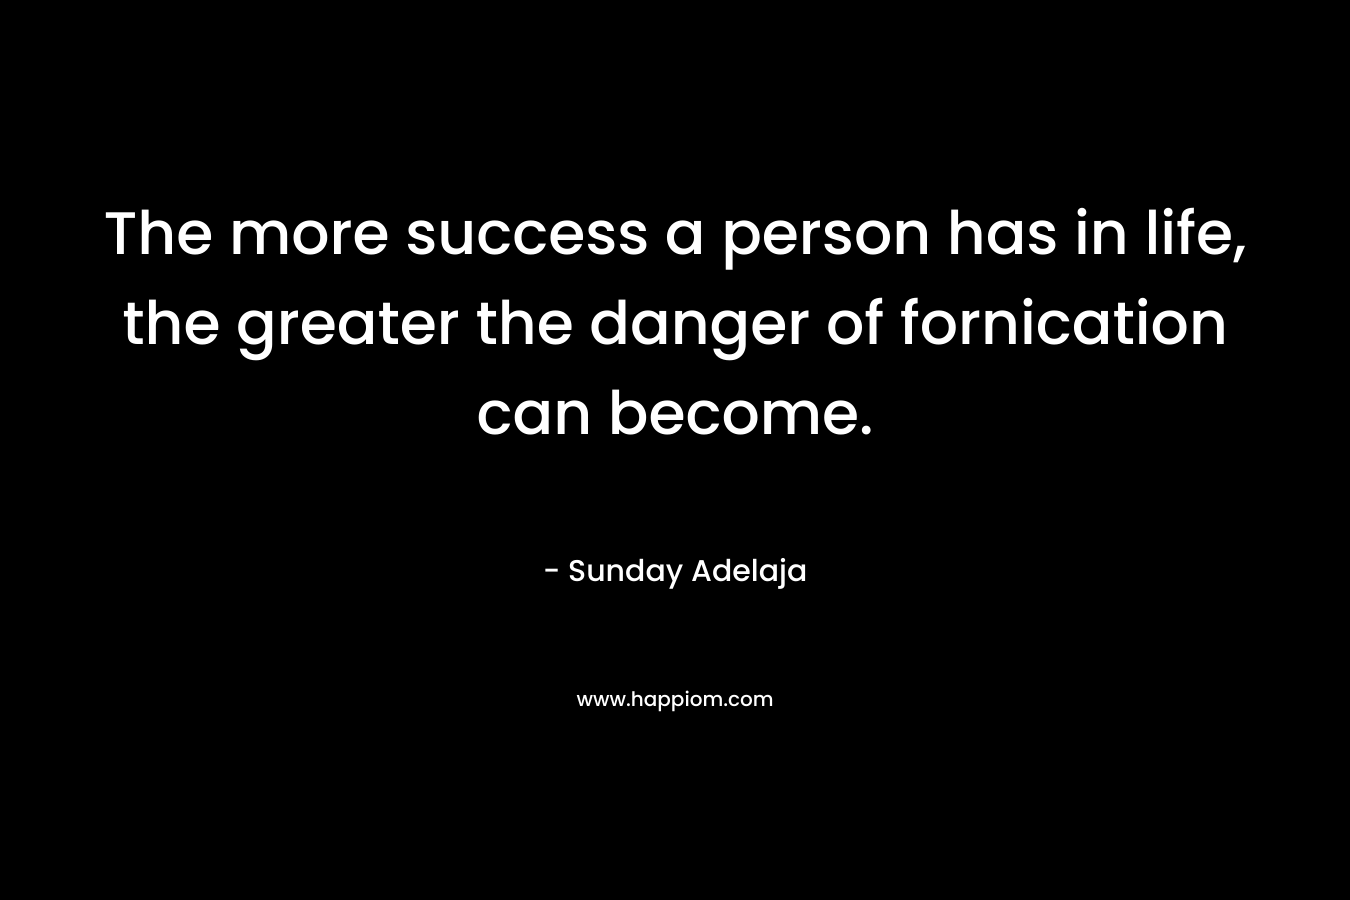 The more success a person has in life, the greater the danger of fornication can become.